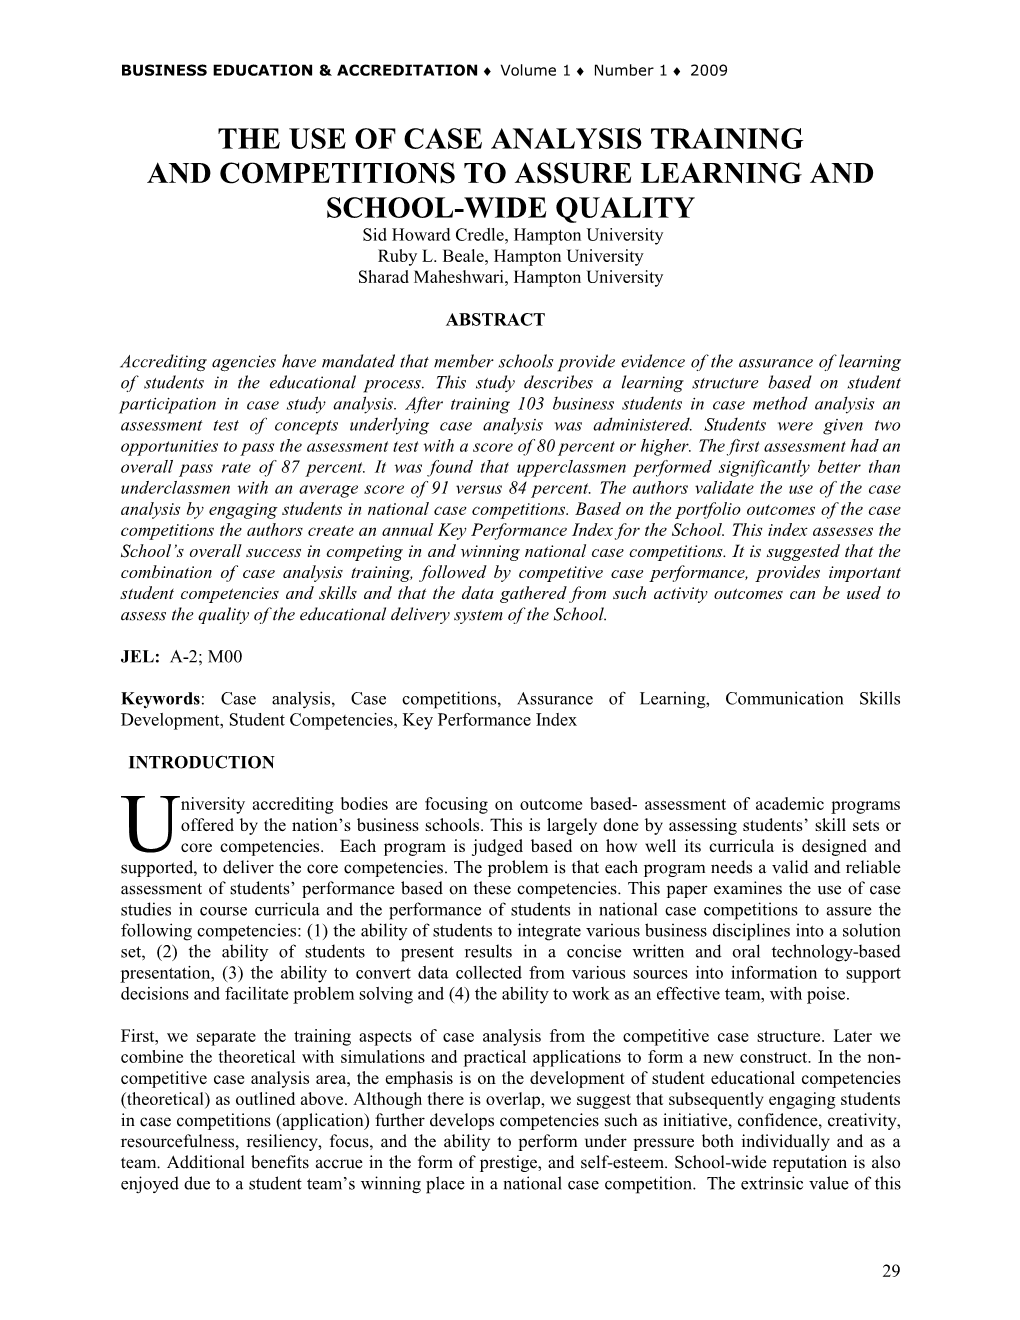 THE USE of CASE ANALYSIS TRAINING and COMPETITIONS to ASSURE LEARNING and SCHOOL-WIDE QUALITY Sid Howard Credle, Hampton University Ruby L